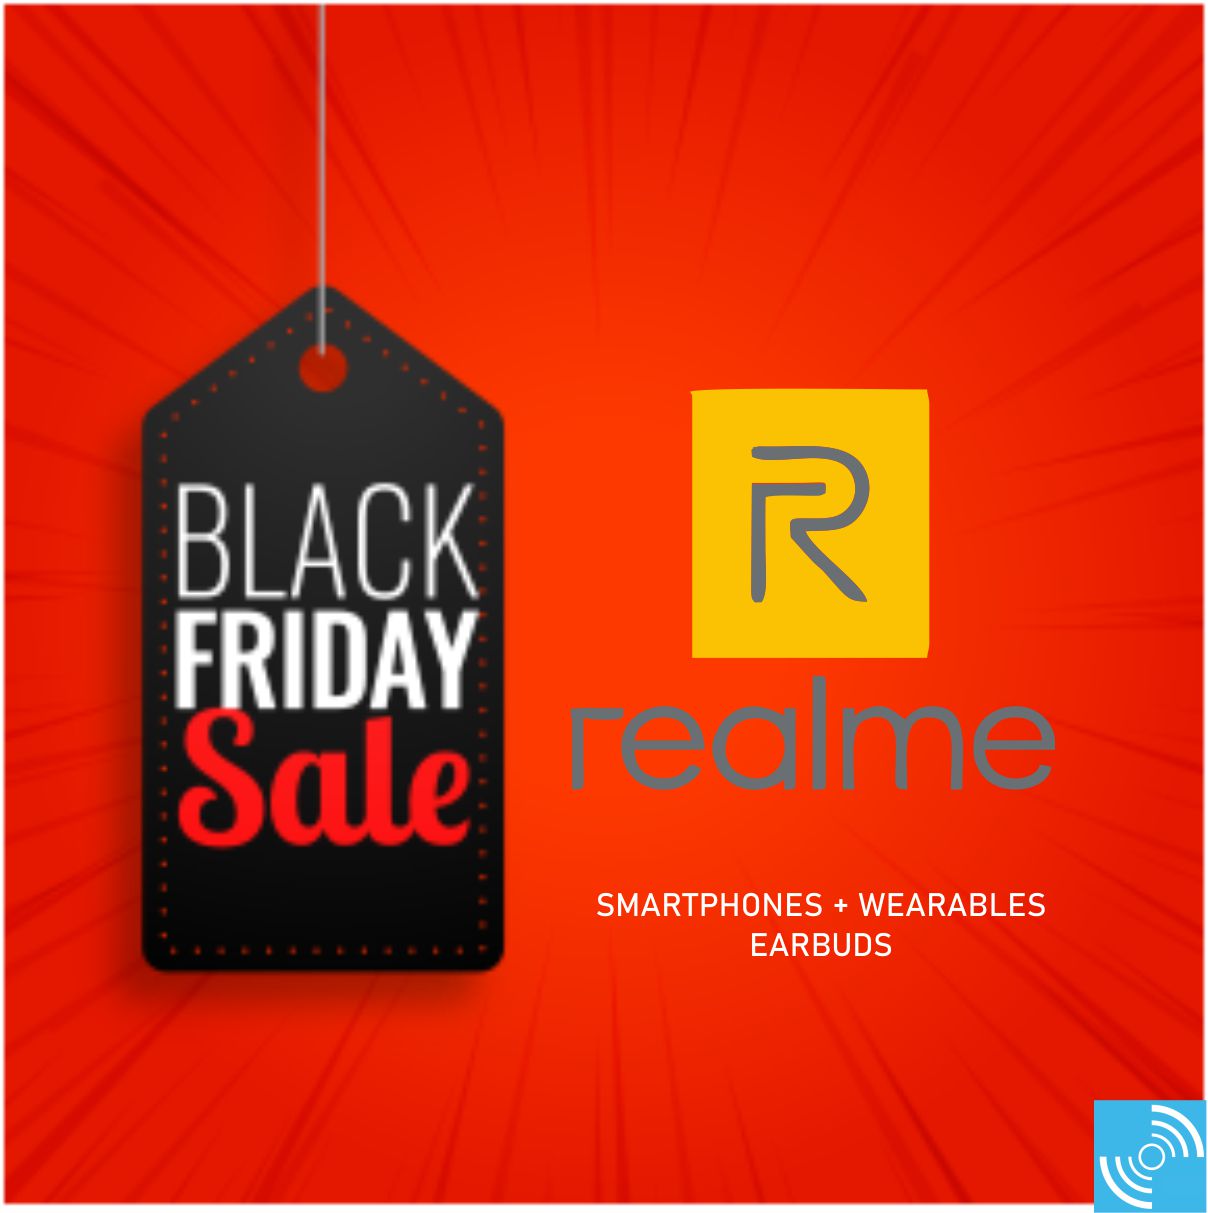 Realme Black Friday Offers are here: Get discounts on its Watch & Smartphones in Europe - Gizmochina